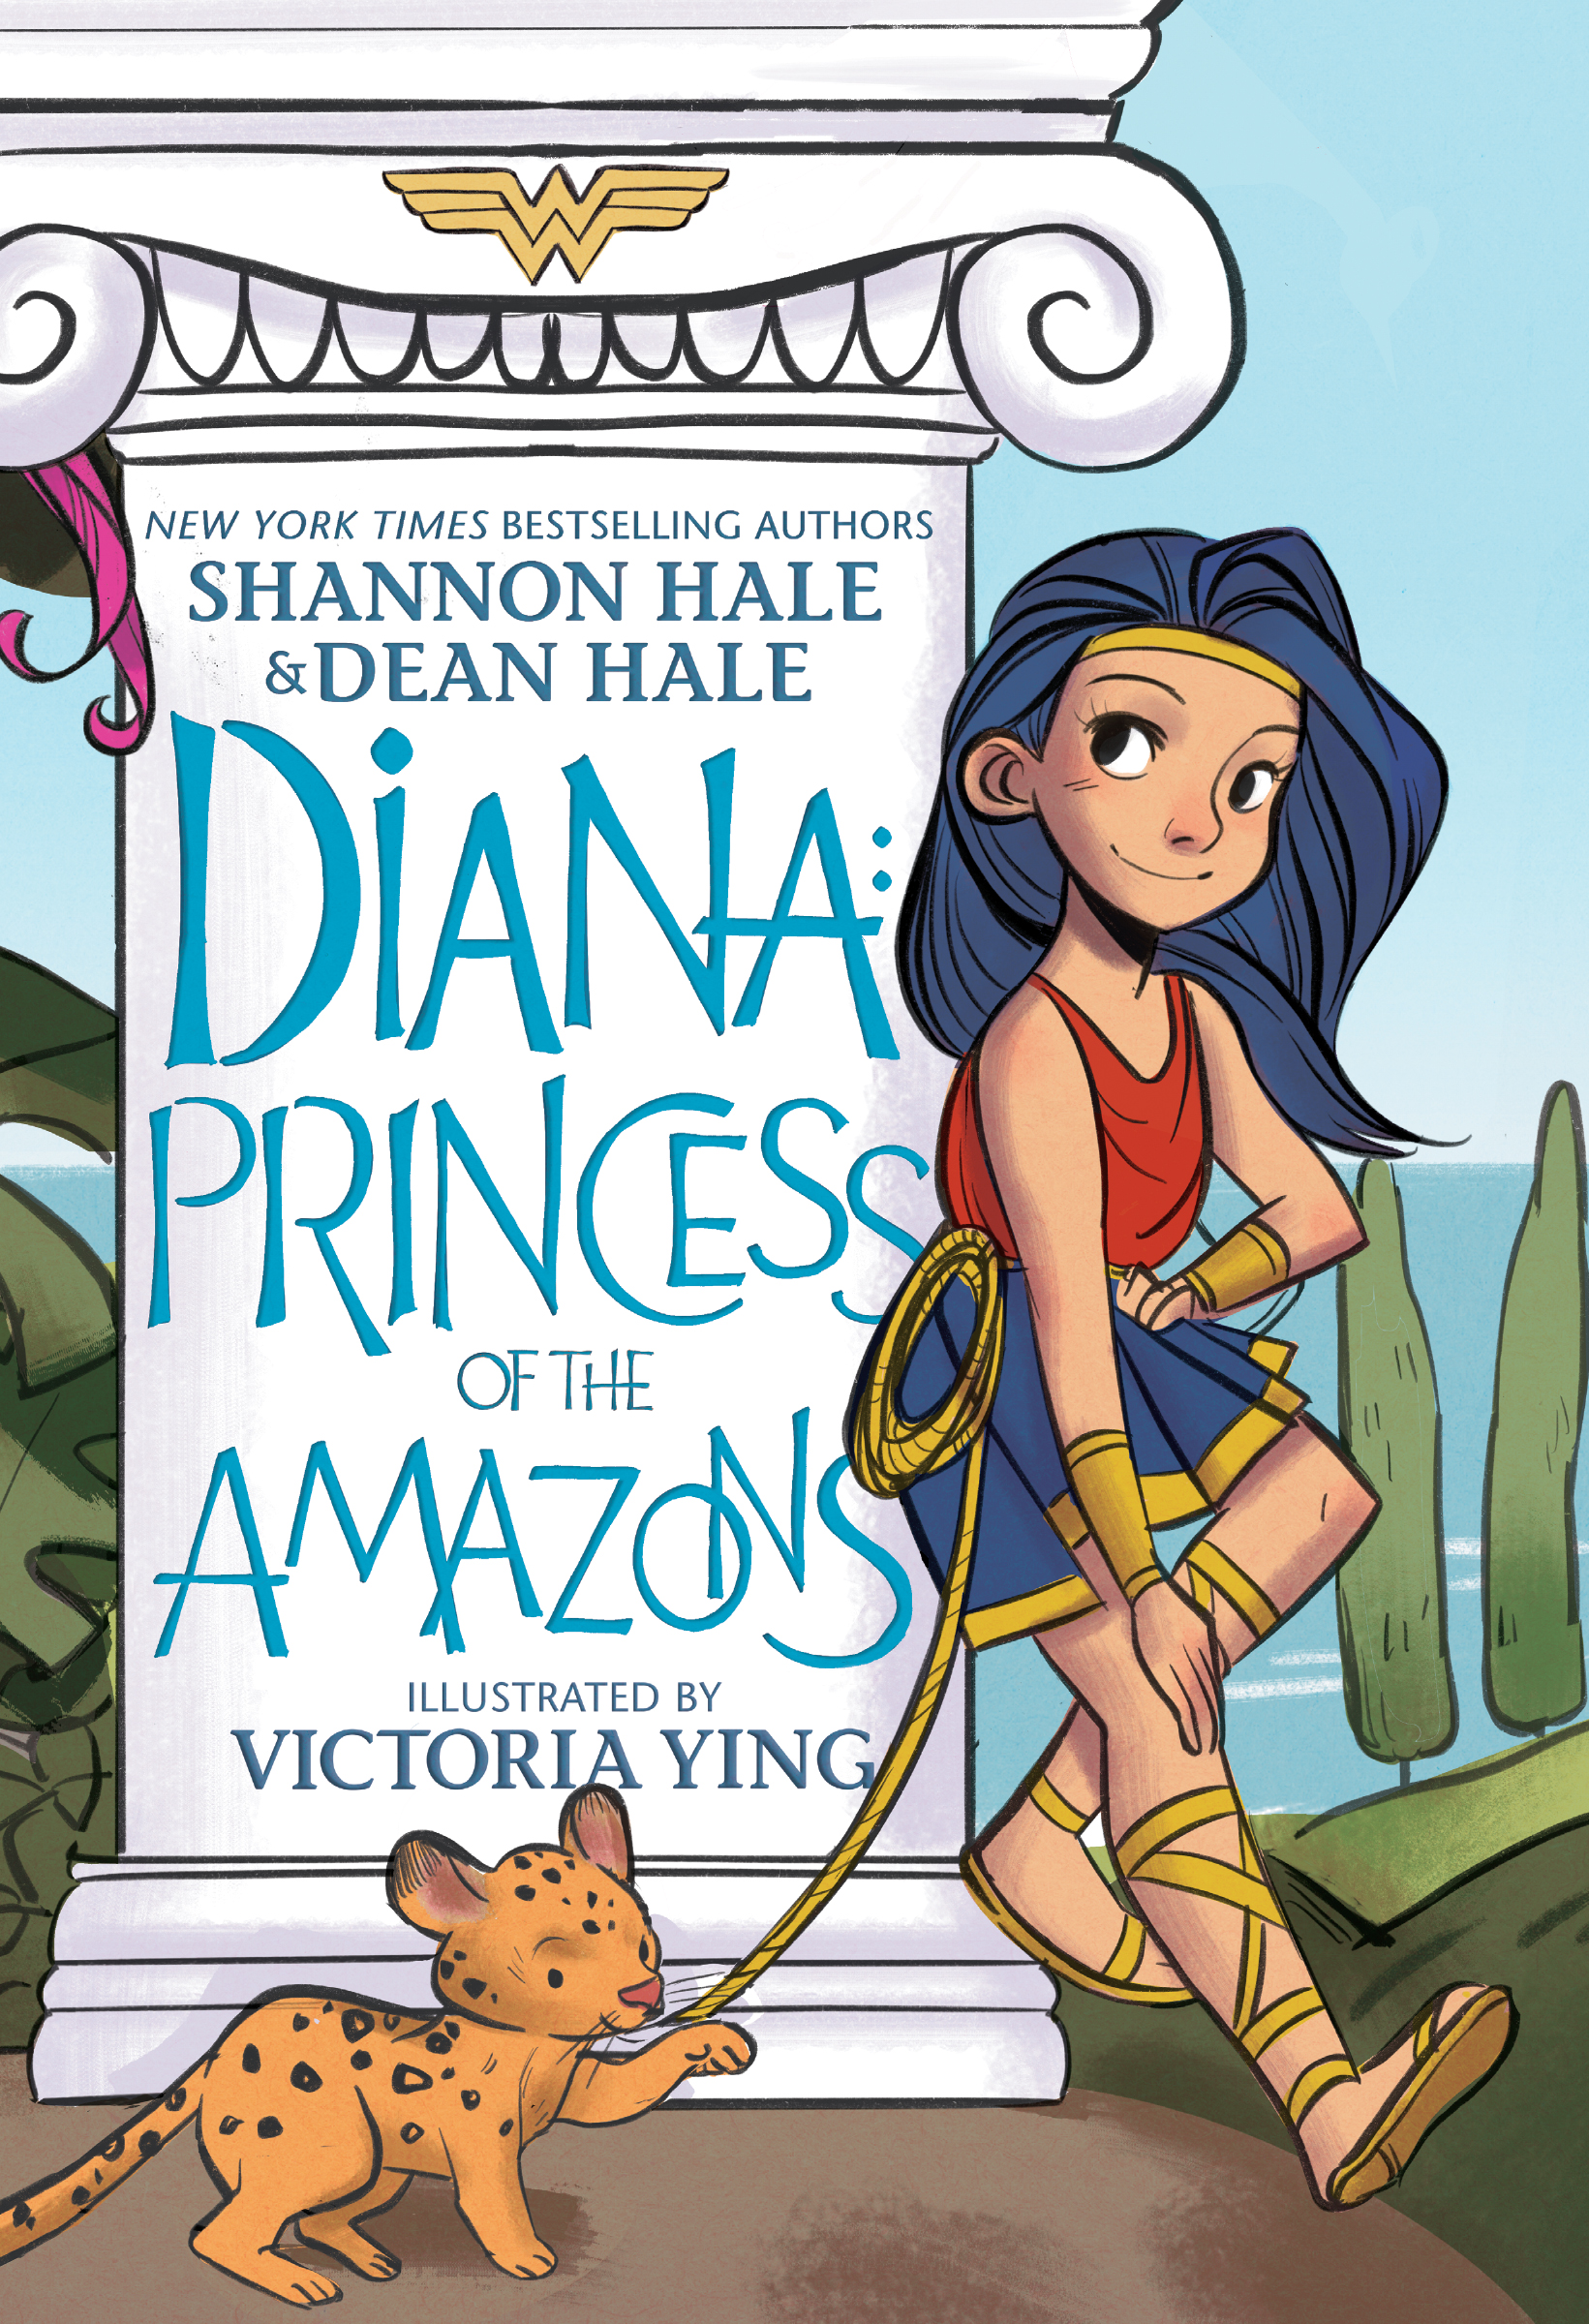 Graphic Novels for Winter 2020: Diana Princess of the Amazons